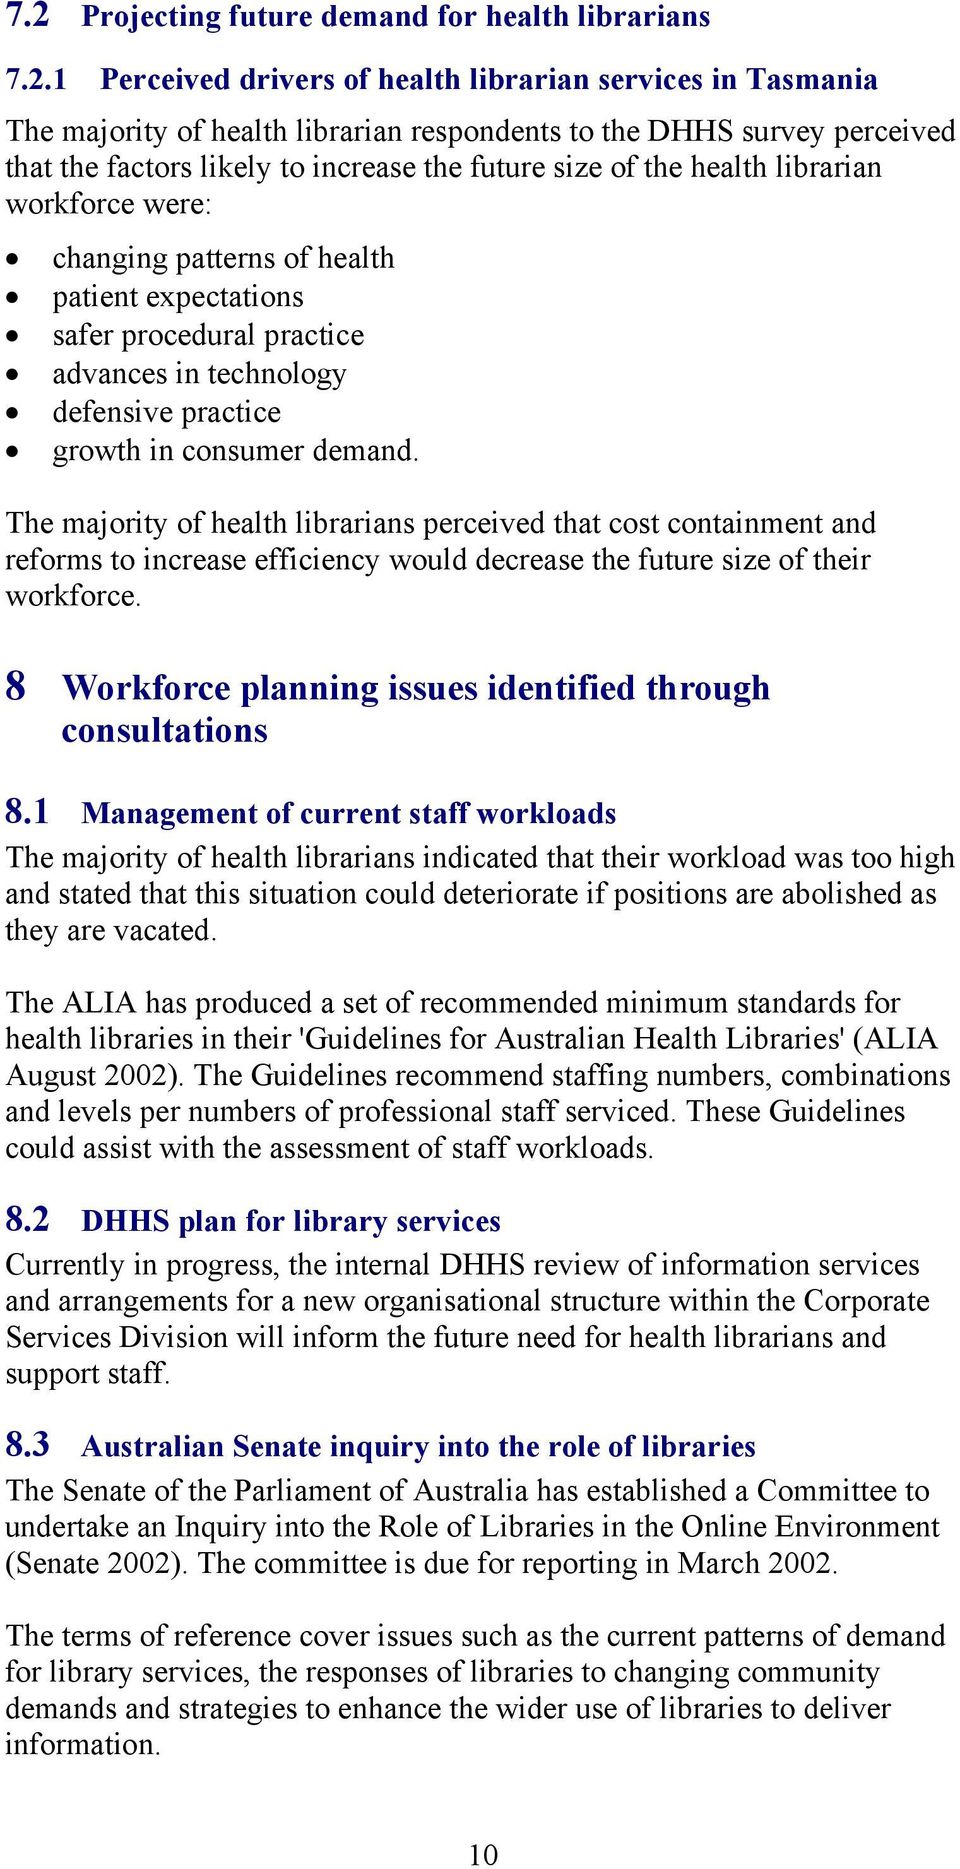 growth in consumer demand. The majority of health librarians perceived that cost containment and reforms to increase efficiency would decrease the future size of their workforce.